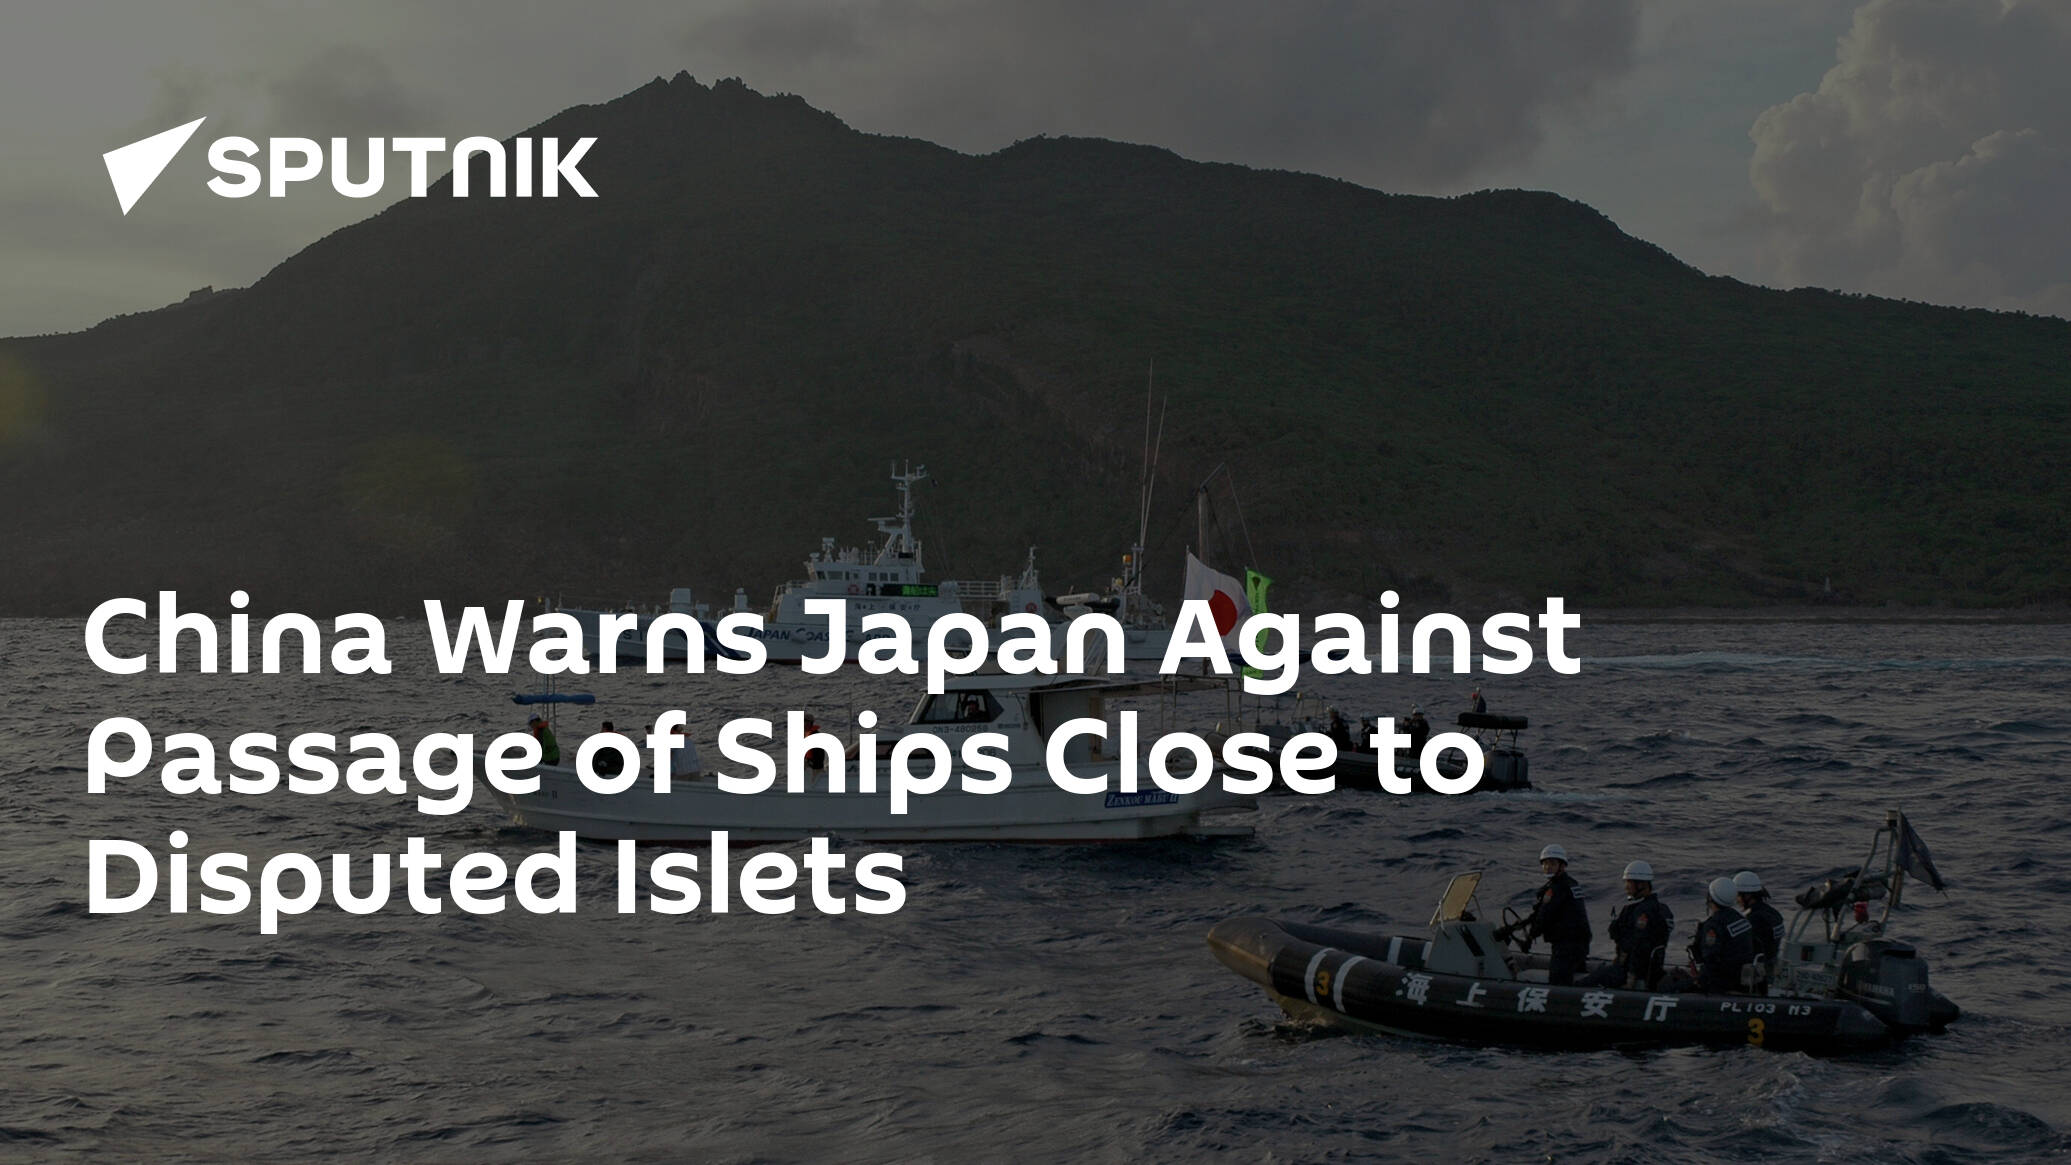 China Warns Japan Against Passage of Ships Close to Disputed Islets